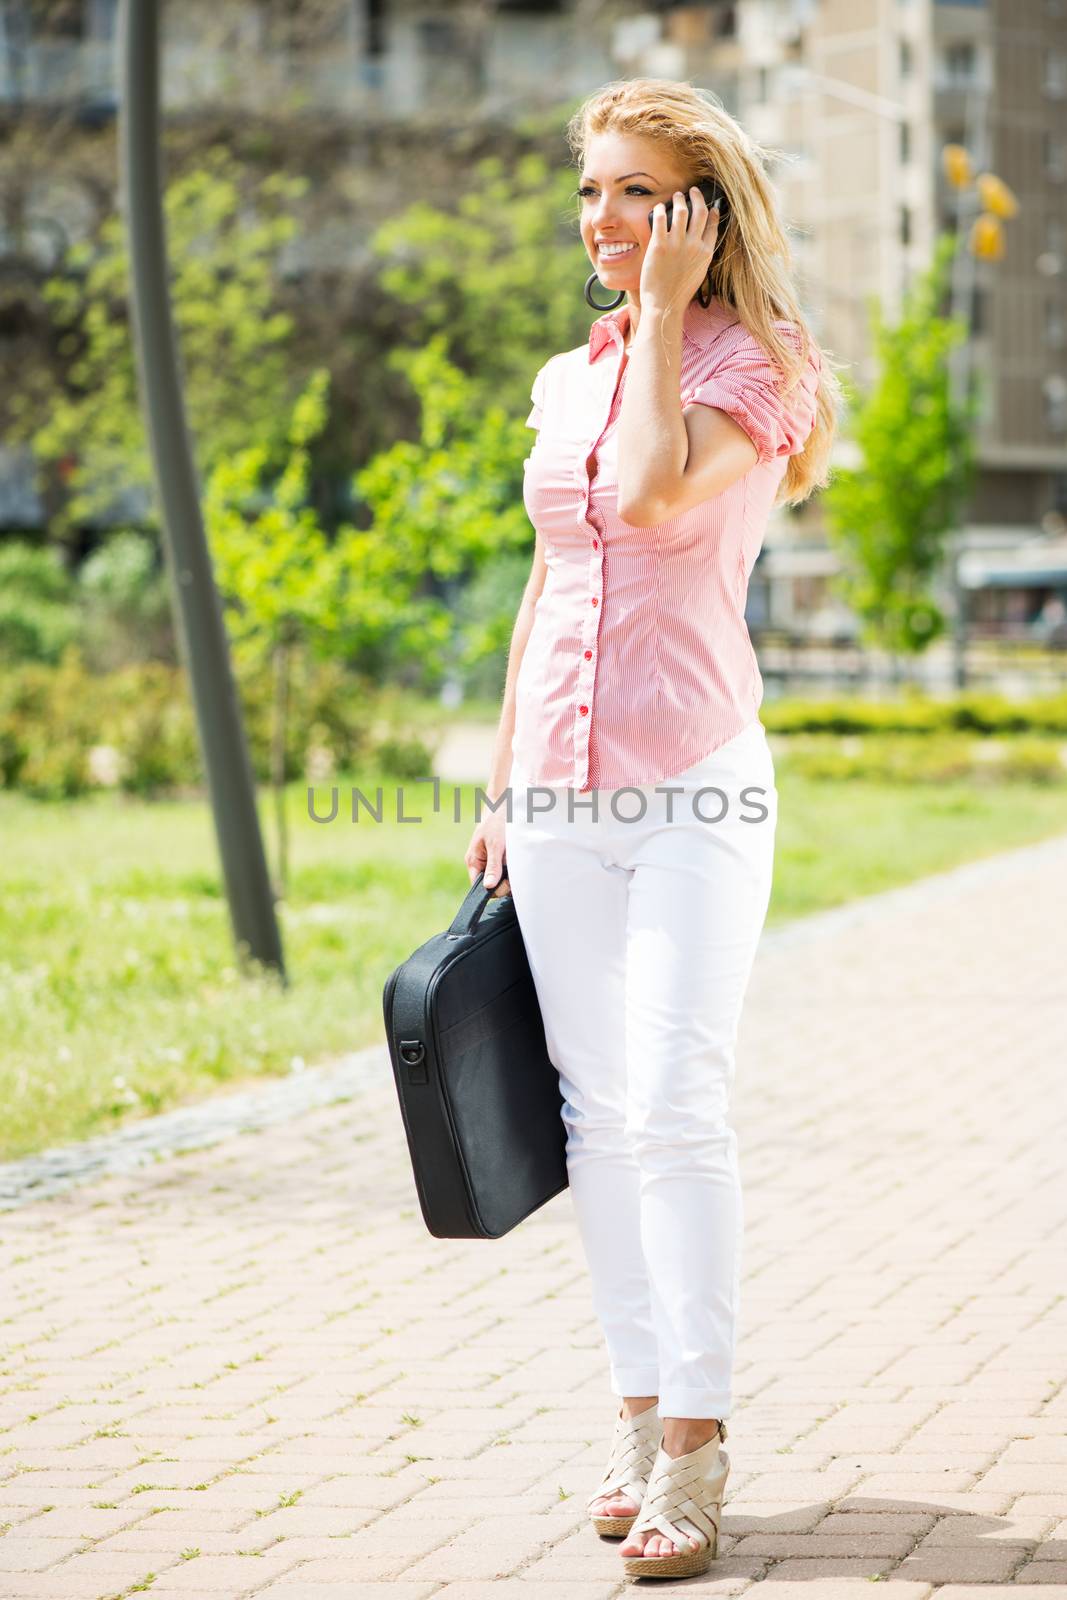 Business Woman In The Park by MilanMarkovic78